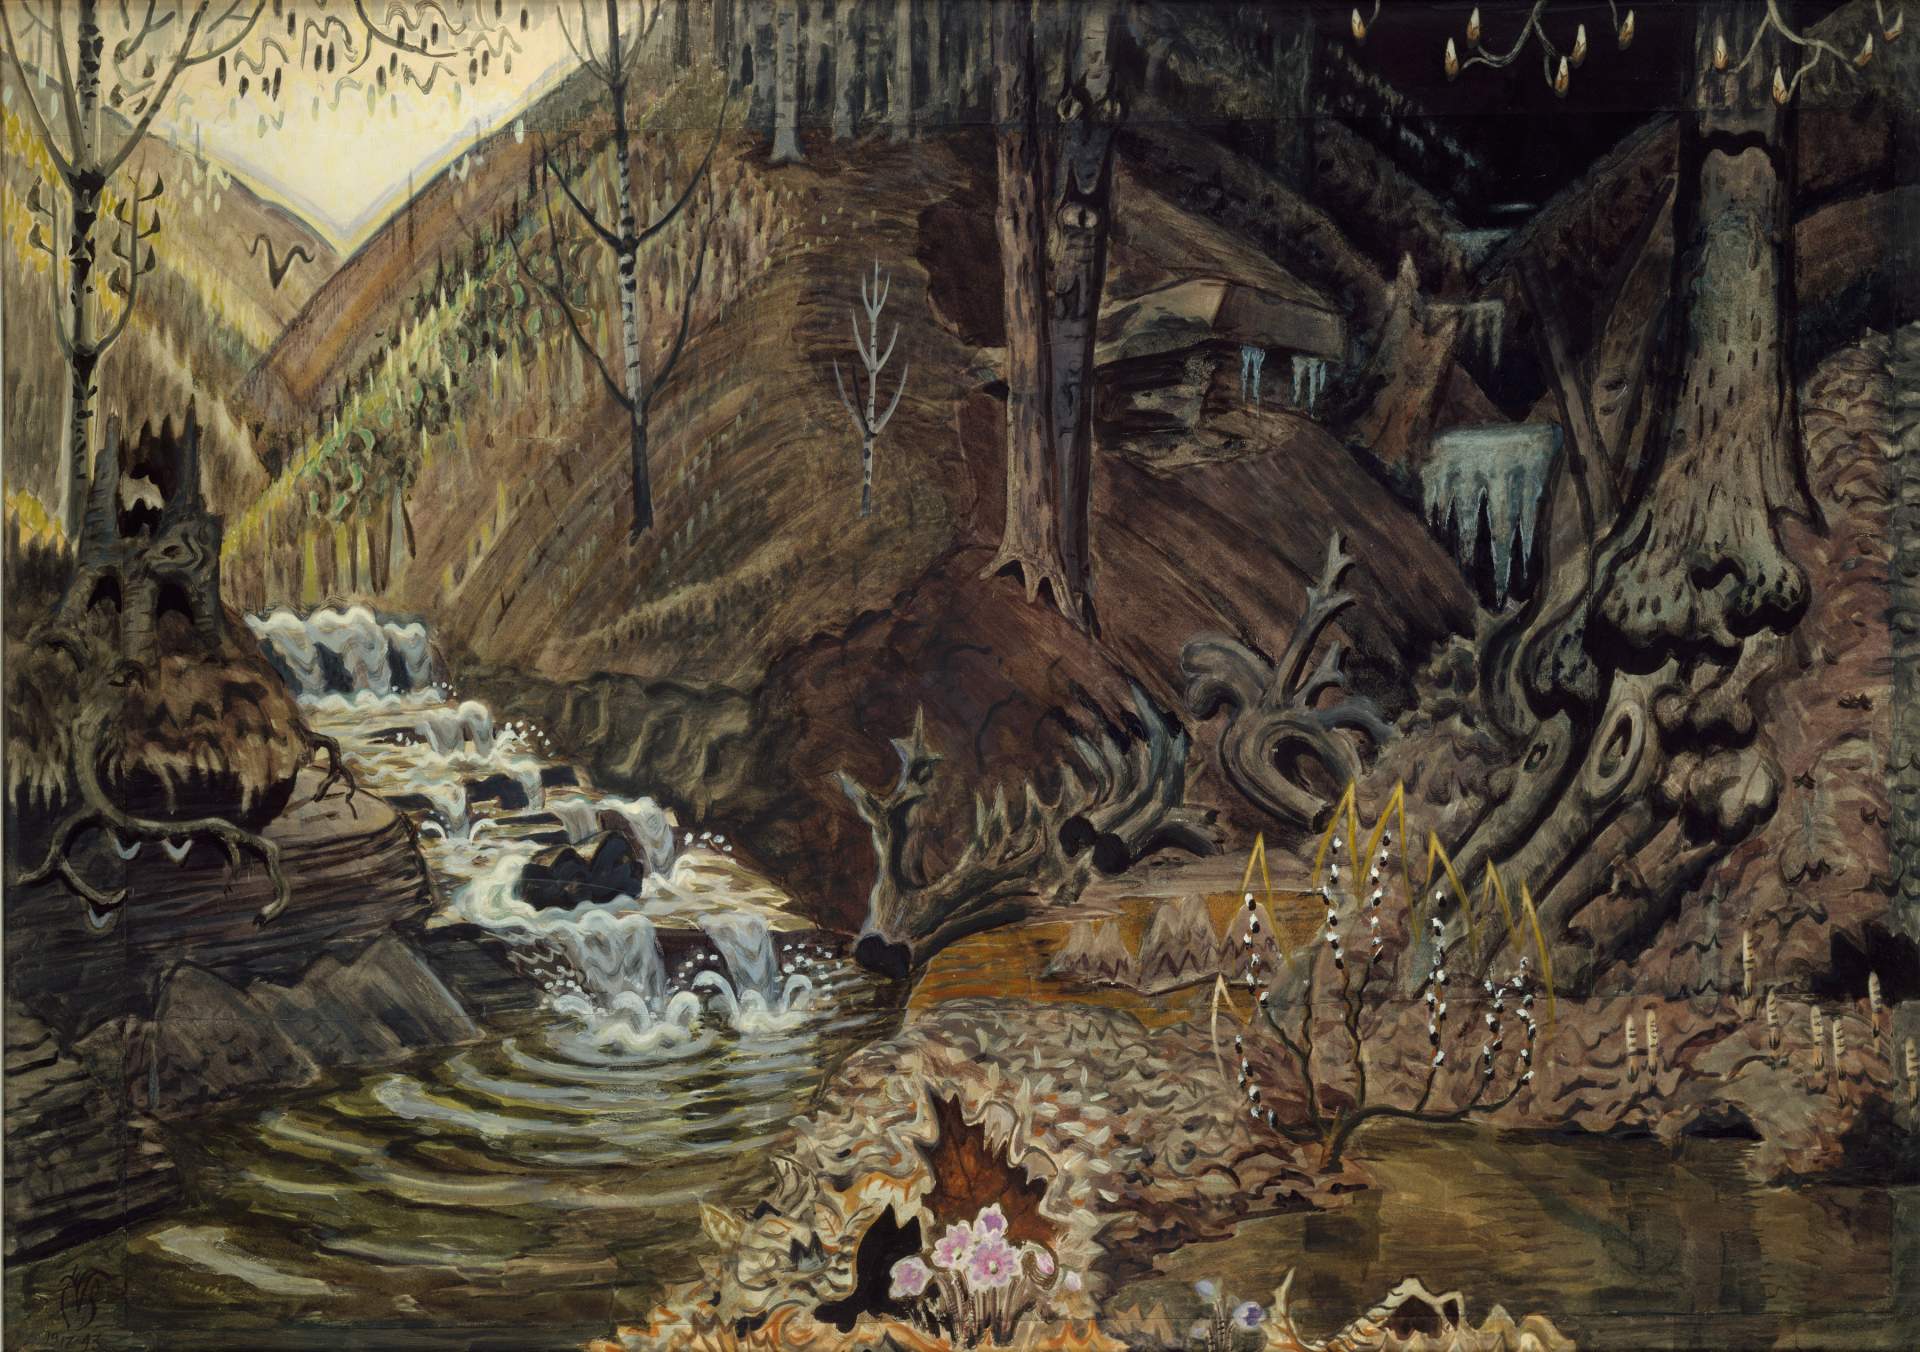 Charles Burchfield, from <em> 50 Years as a Painter</em>